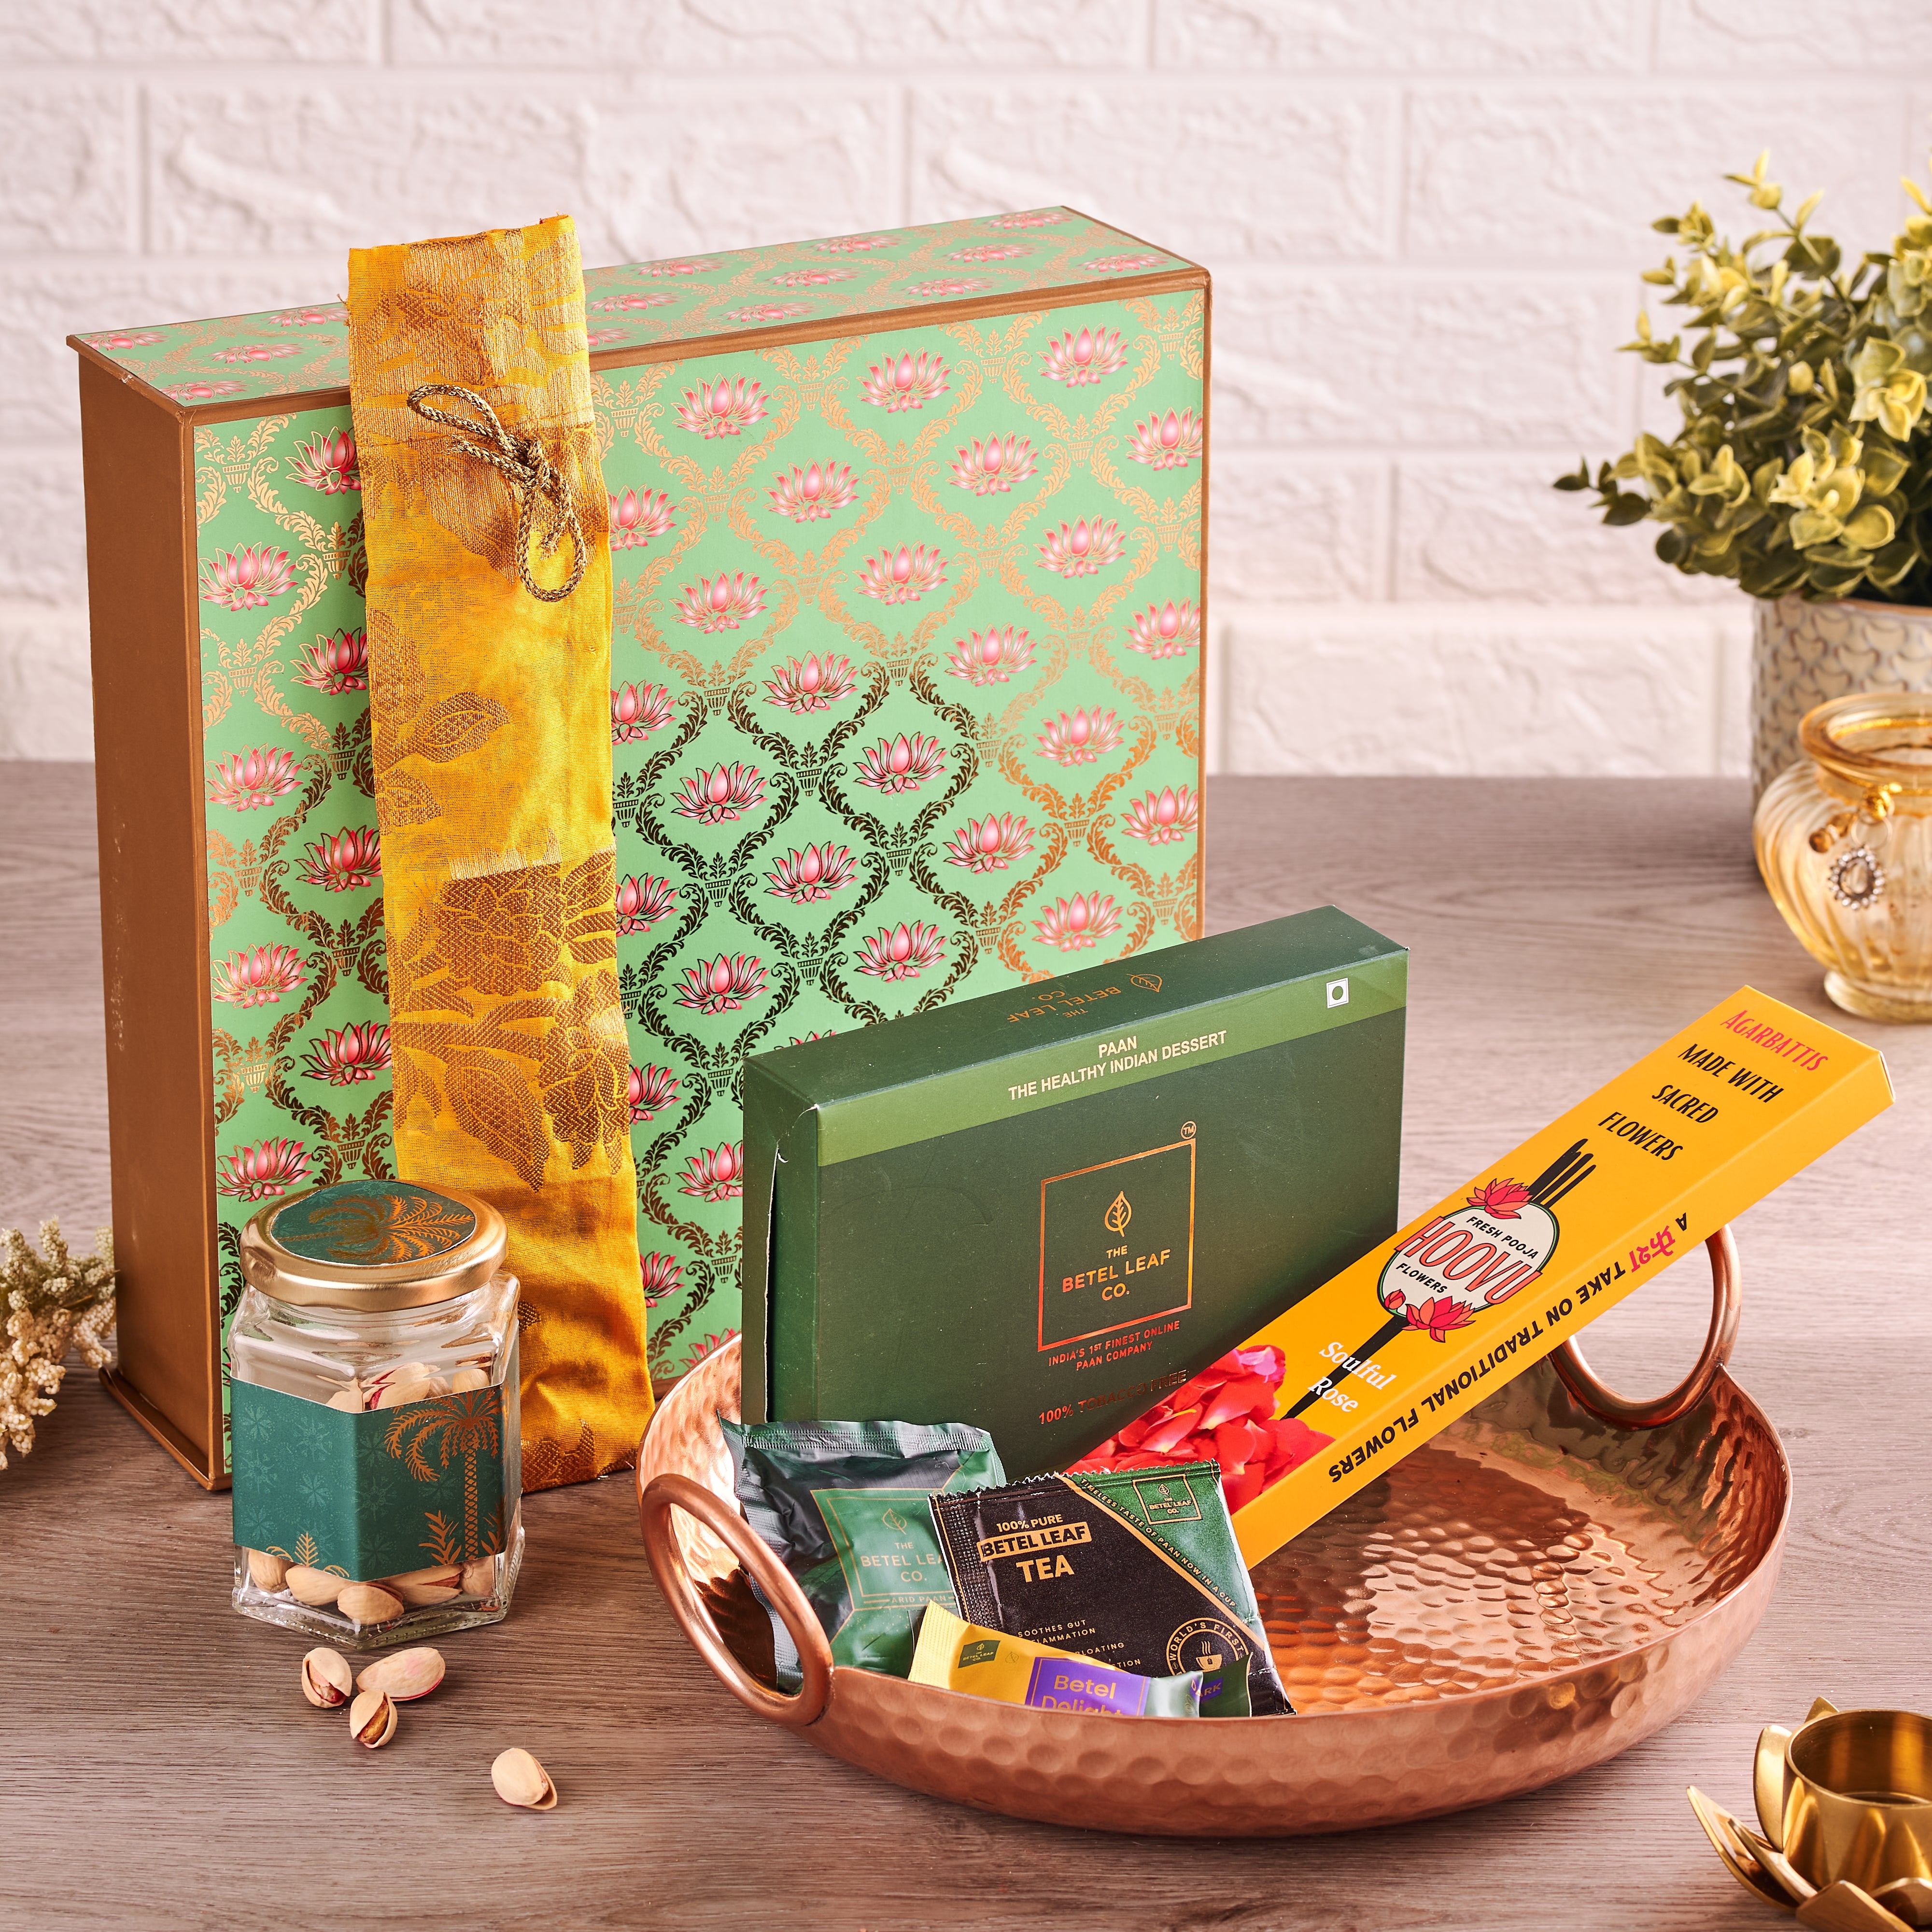 Our Top 6 Gift Ideas For Diwali | Rambling Rose